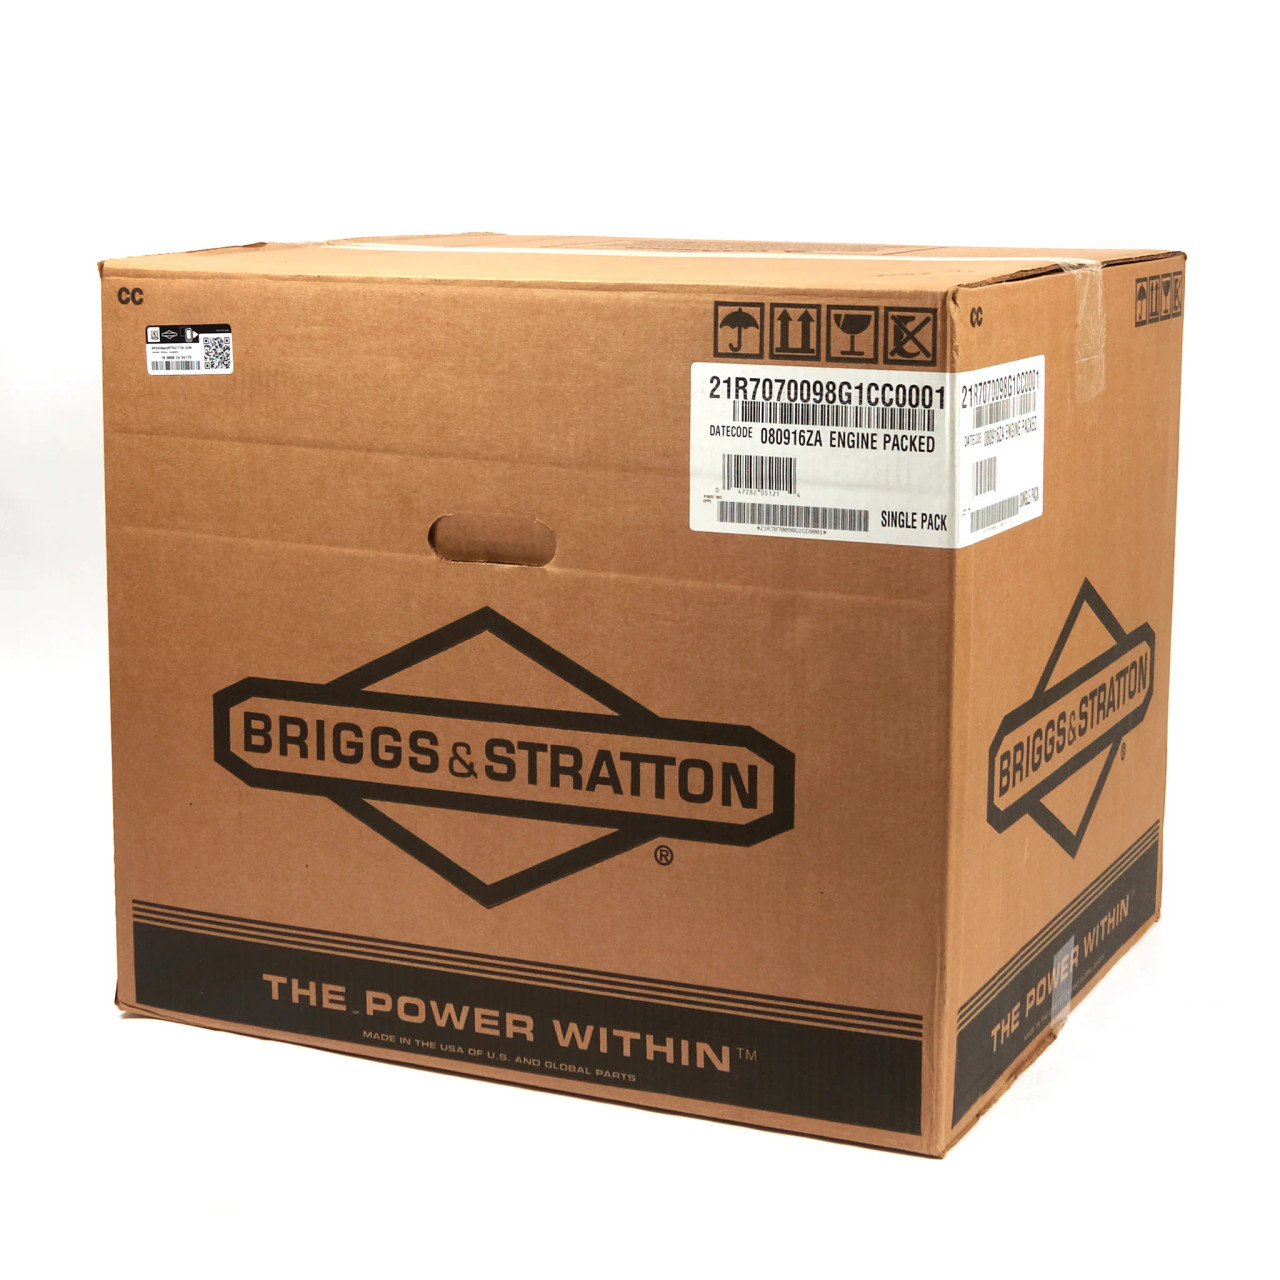 ENGINE PACKED SINGLE CARTON - 21R707-0098-G1 (1 LEFT THEN DISCONTINUED)